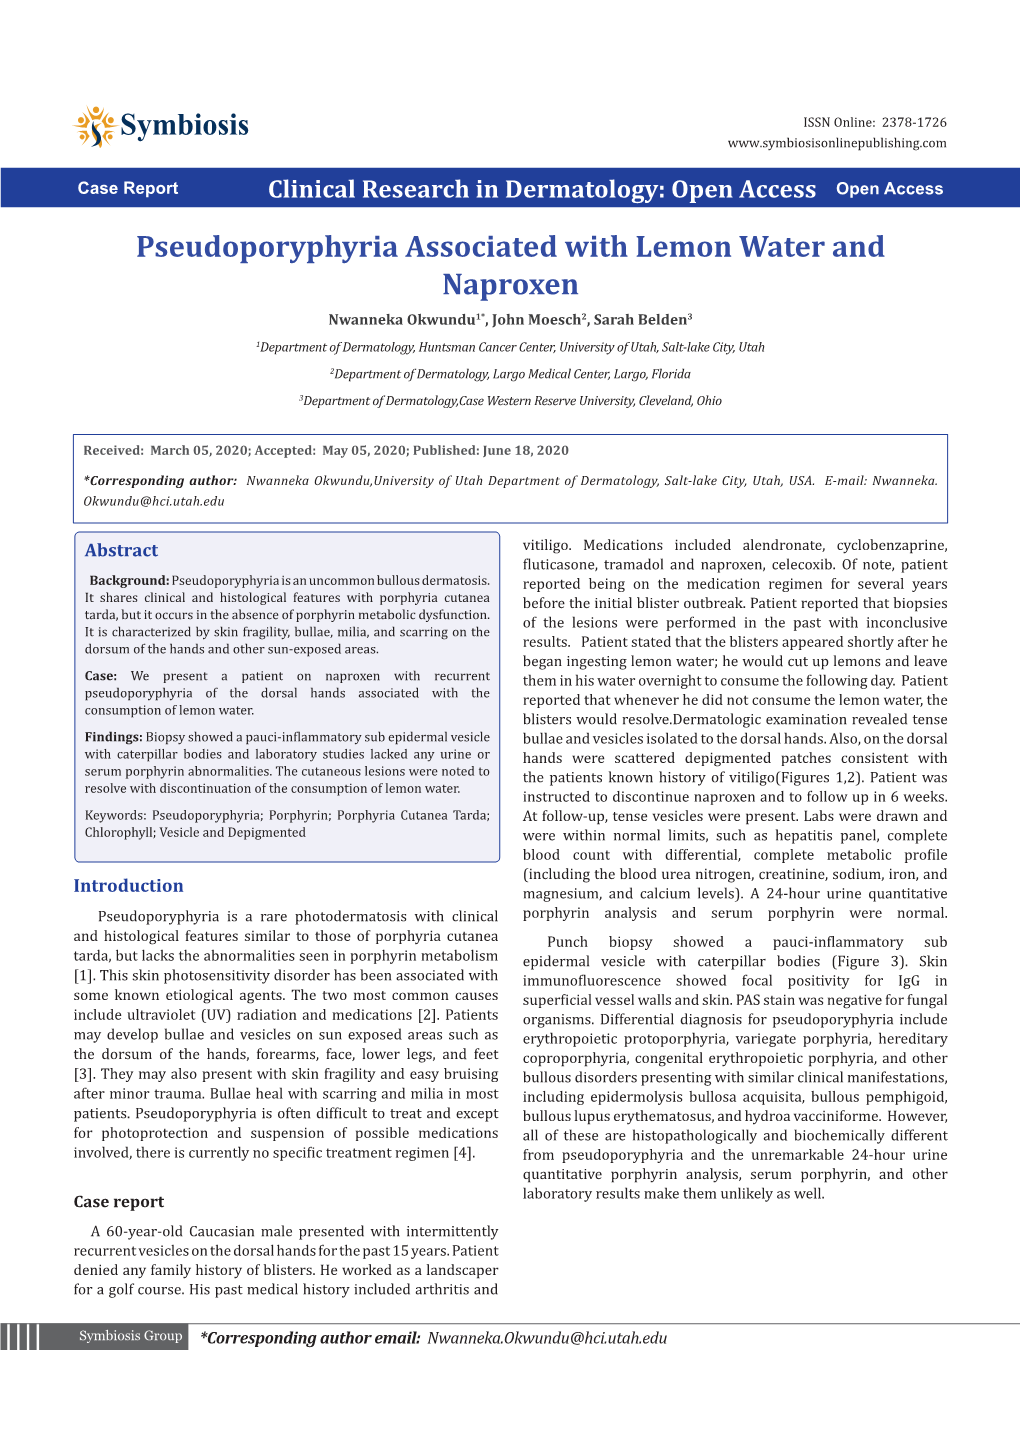 Pseudoporyphyria Associated with Lemon Water and Naproxen